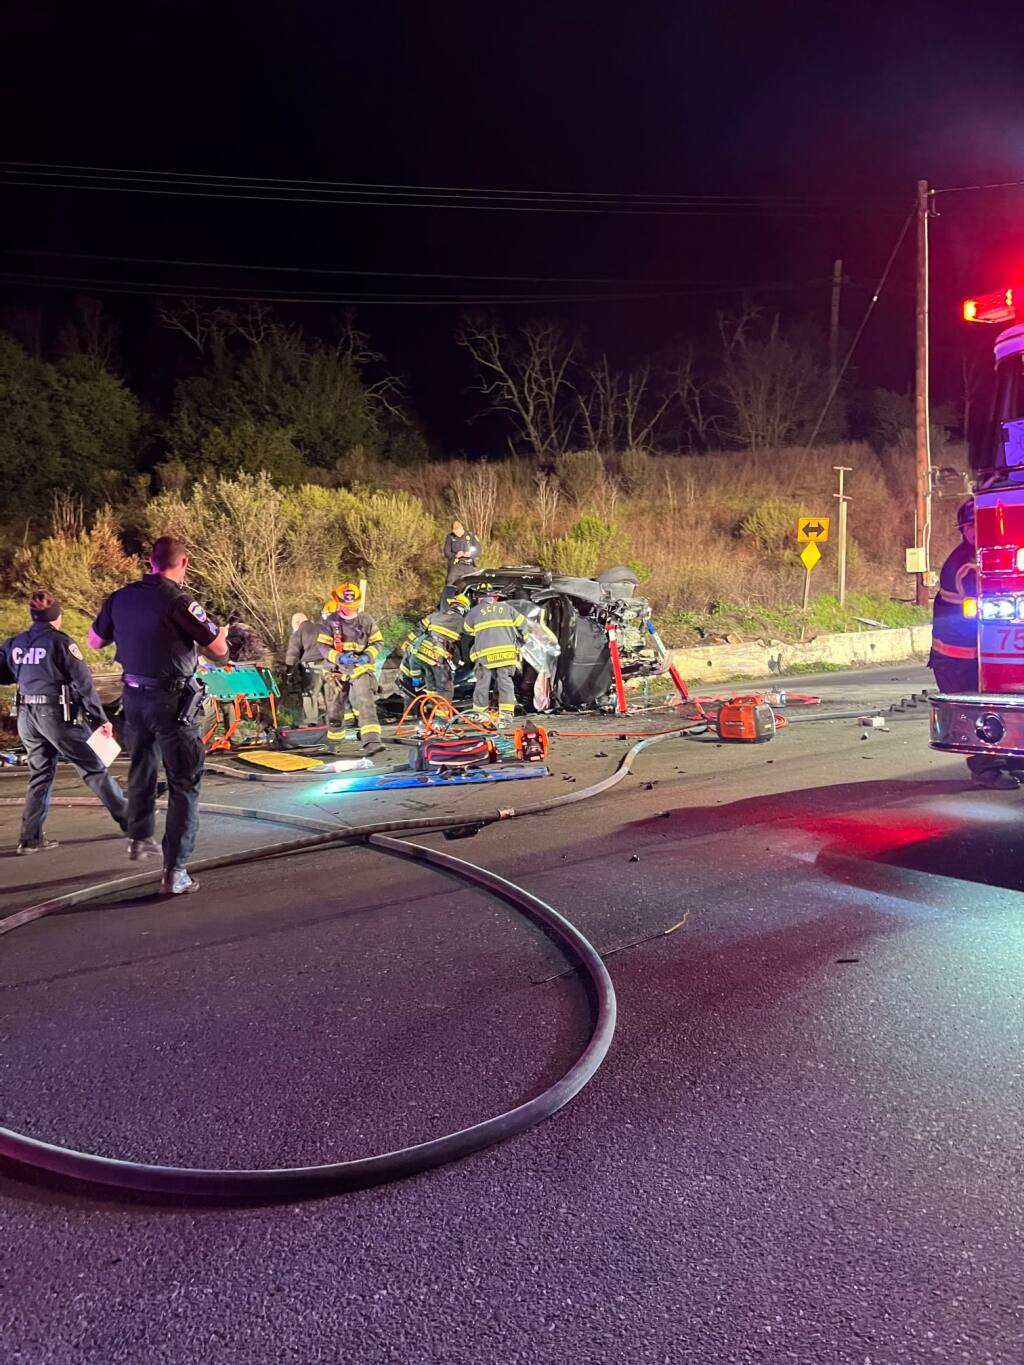 A driver fled the scene of a crash near Windsor on Sunday, Jan. 23, 2022, leaving four injured, according to authorities. (Sonoma County Fire District)